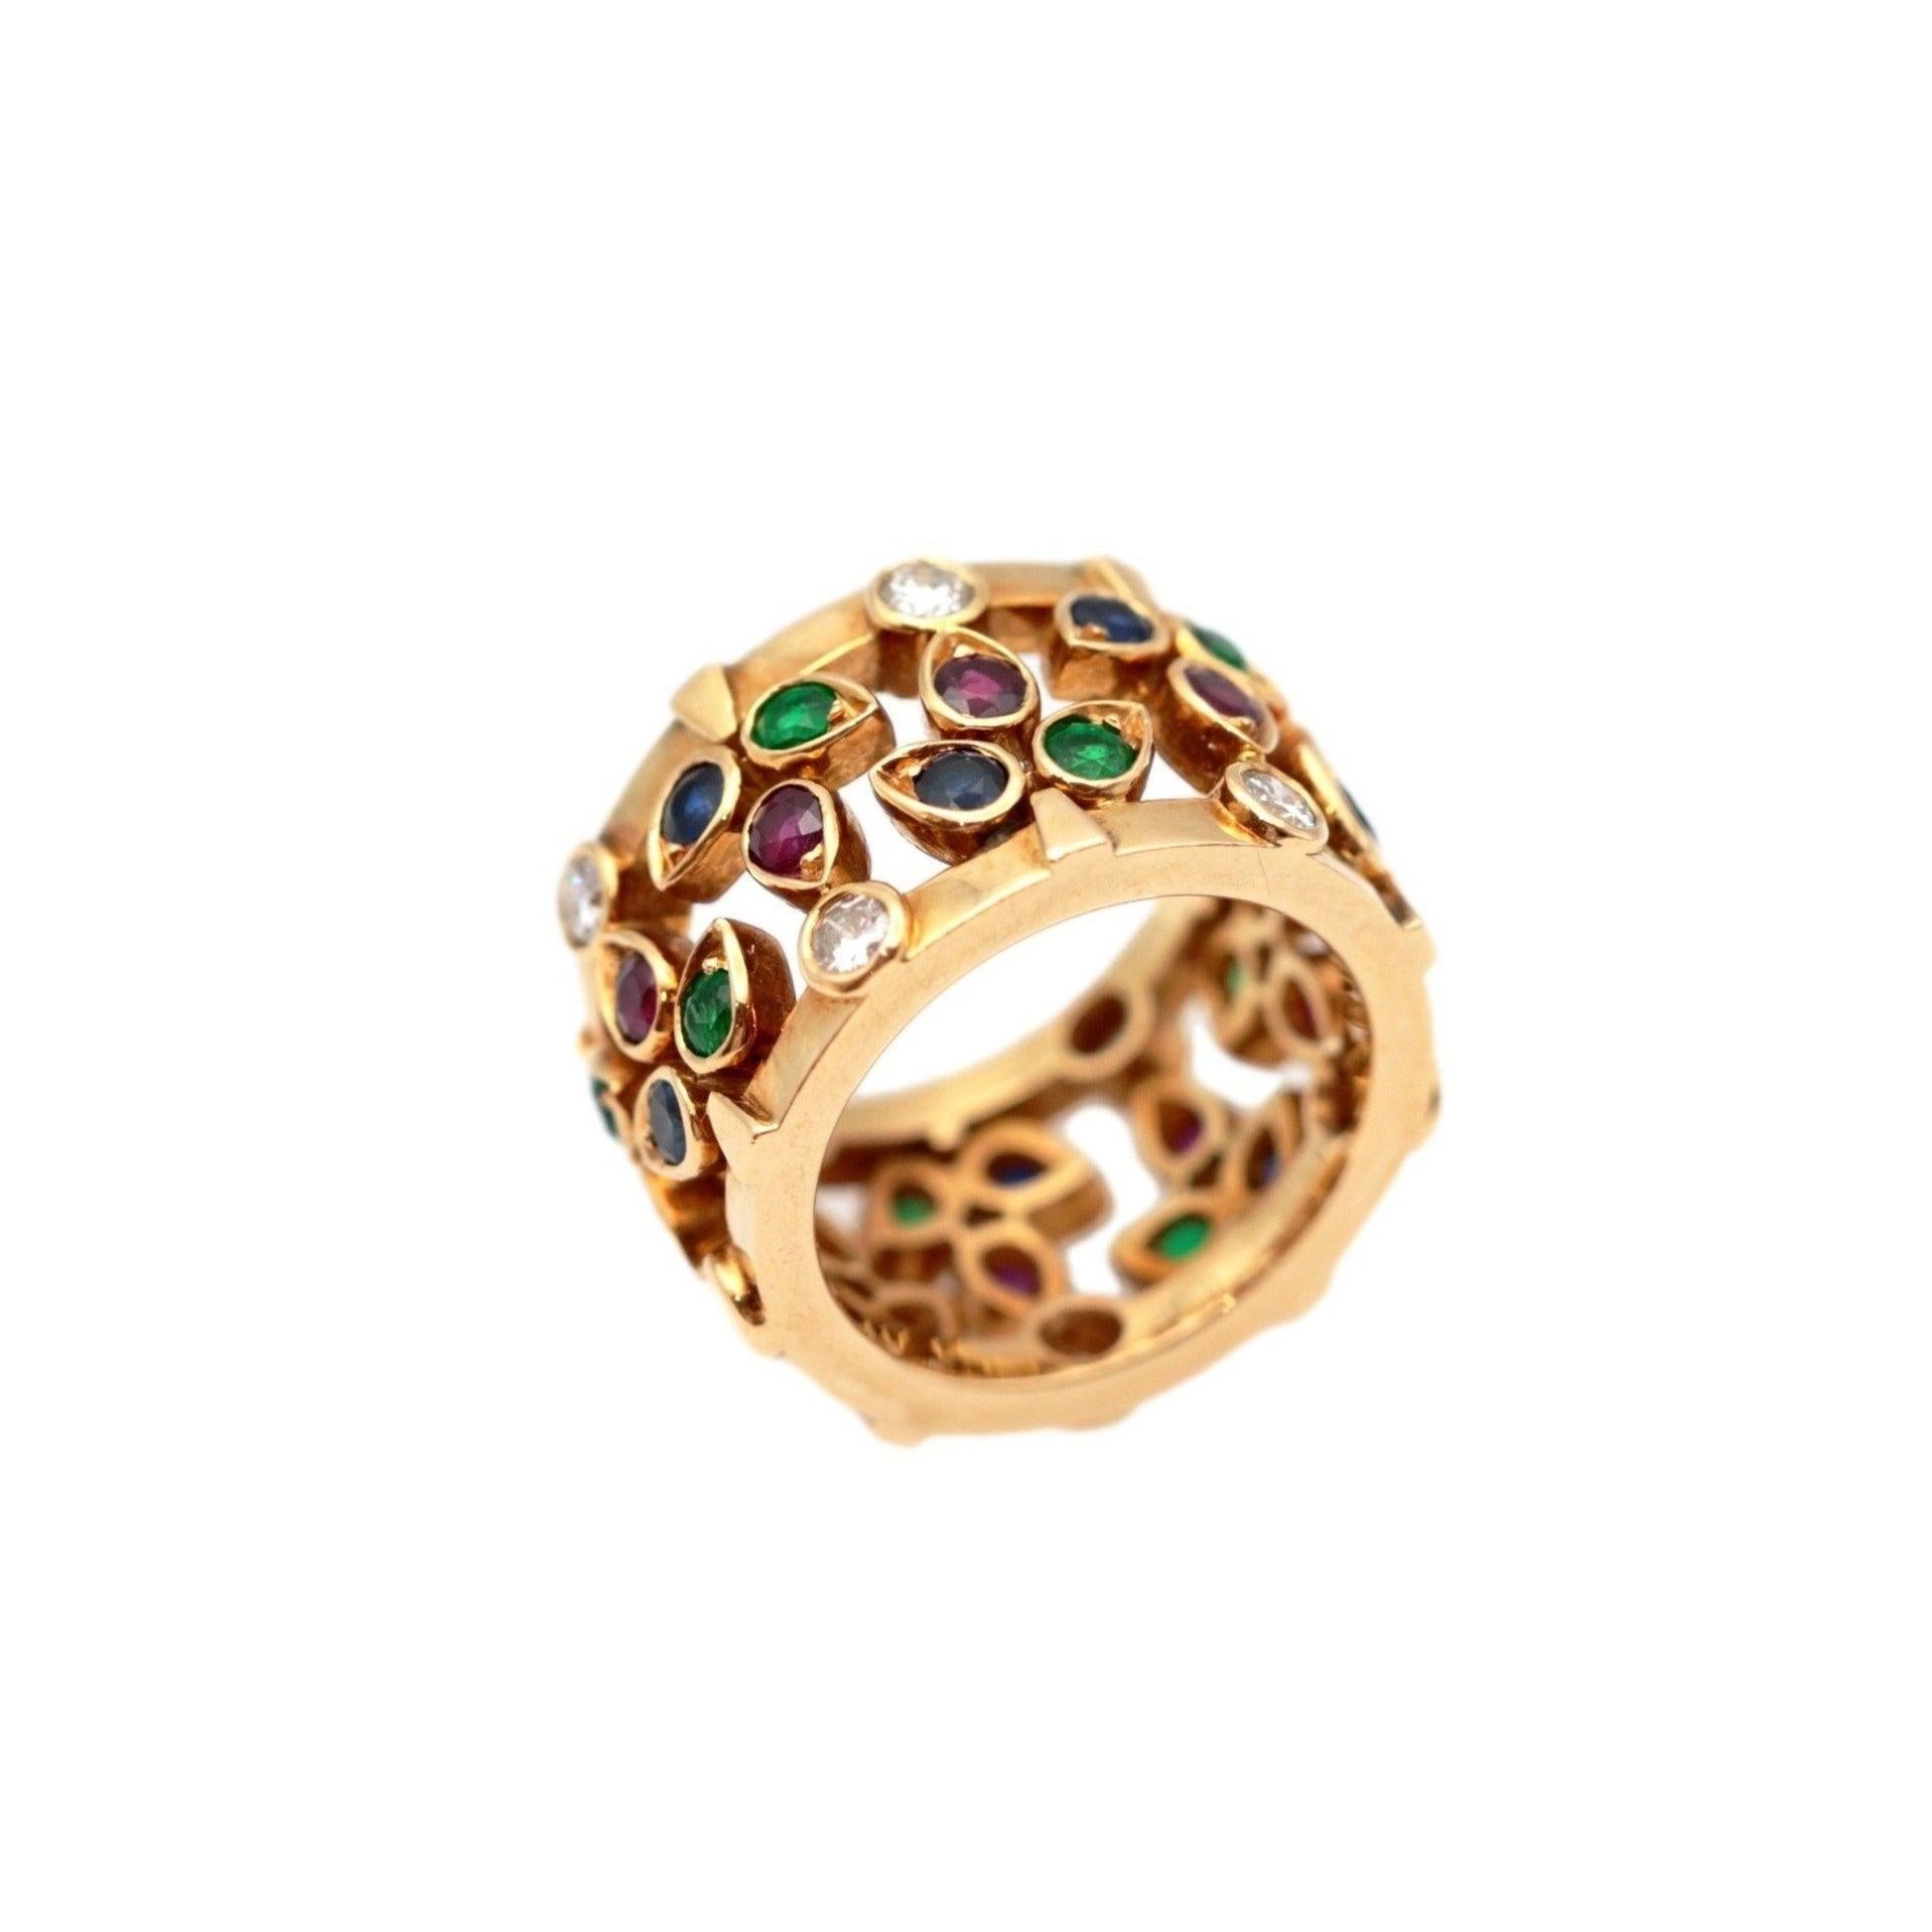 Cartier Multicolor Diamond, Emerald, Ruby, Sapphire Ring in 18K Yellow Gold

Additional Information:
Brand: Cartier
Gender: Women
Model: multicolor ring
Gemstone: Diamond, Emerald, Ruby, Sapphire
Condition: Good
Condition details: The item has been